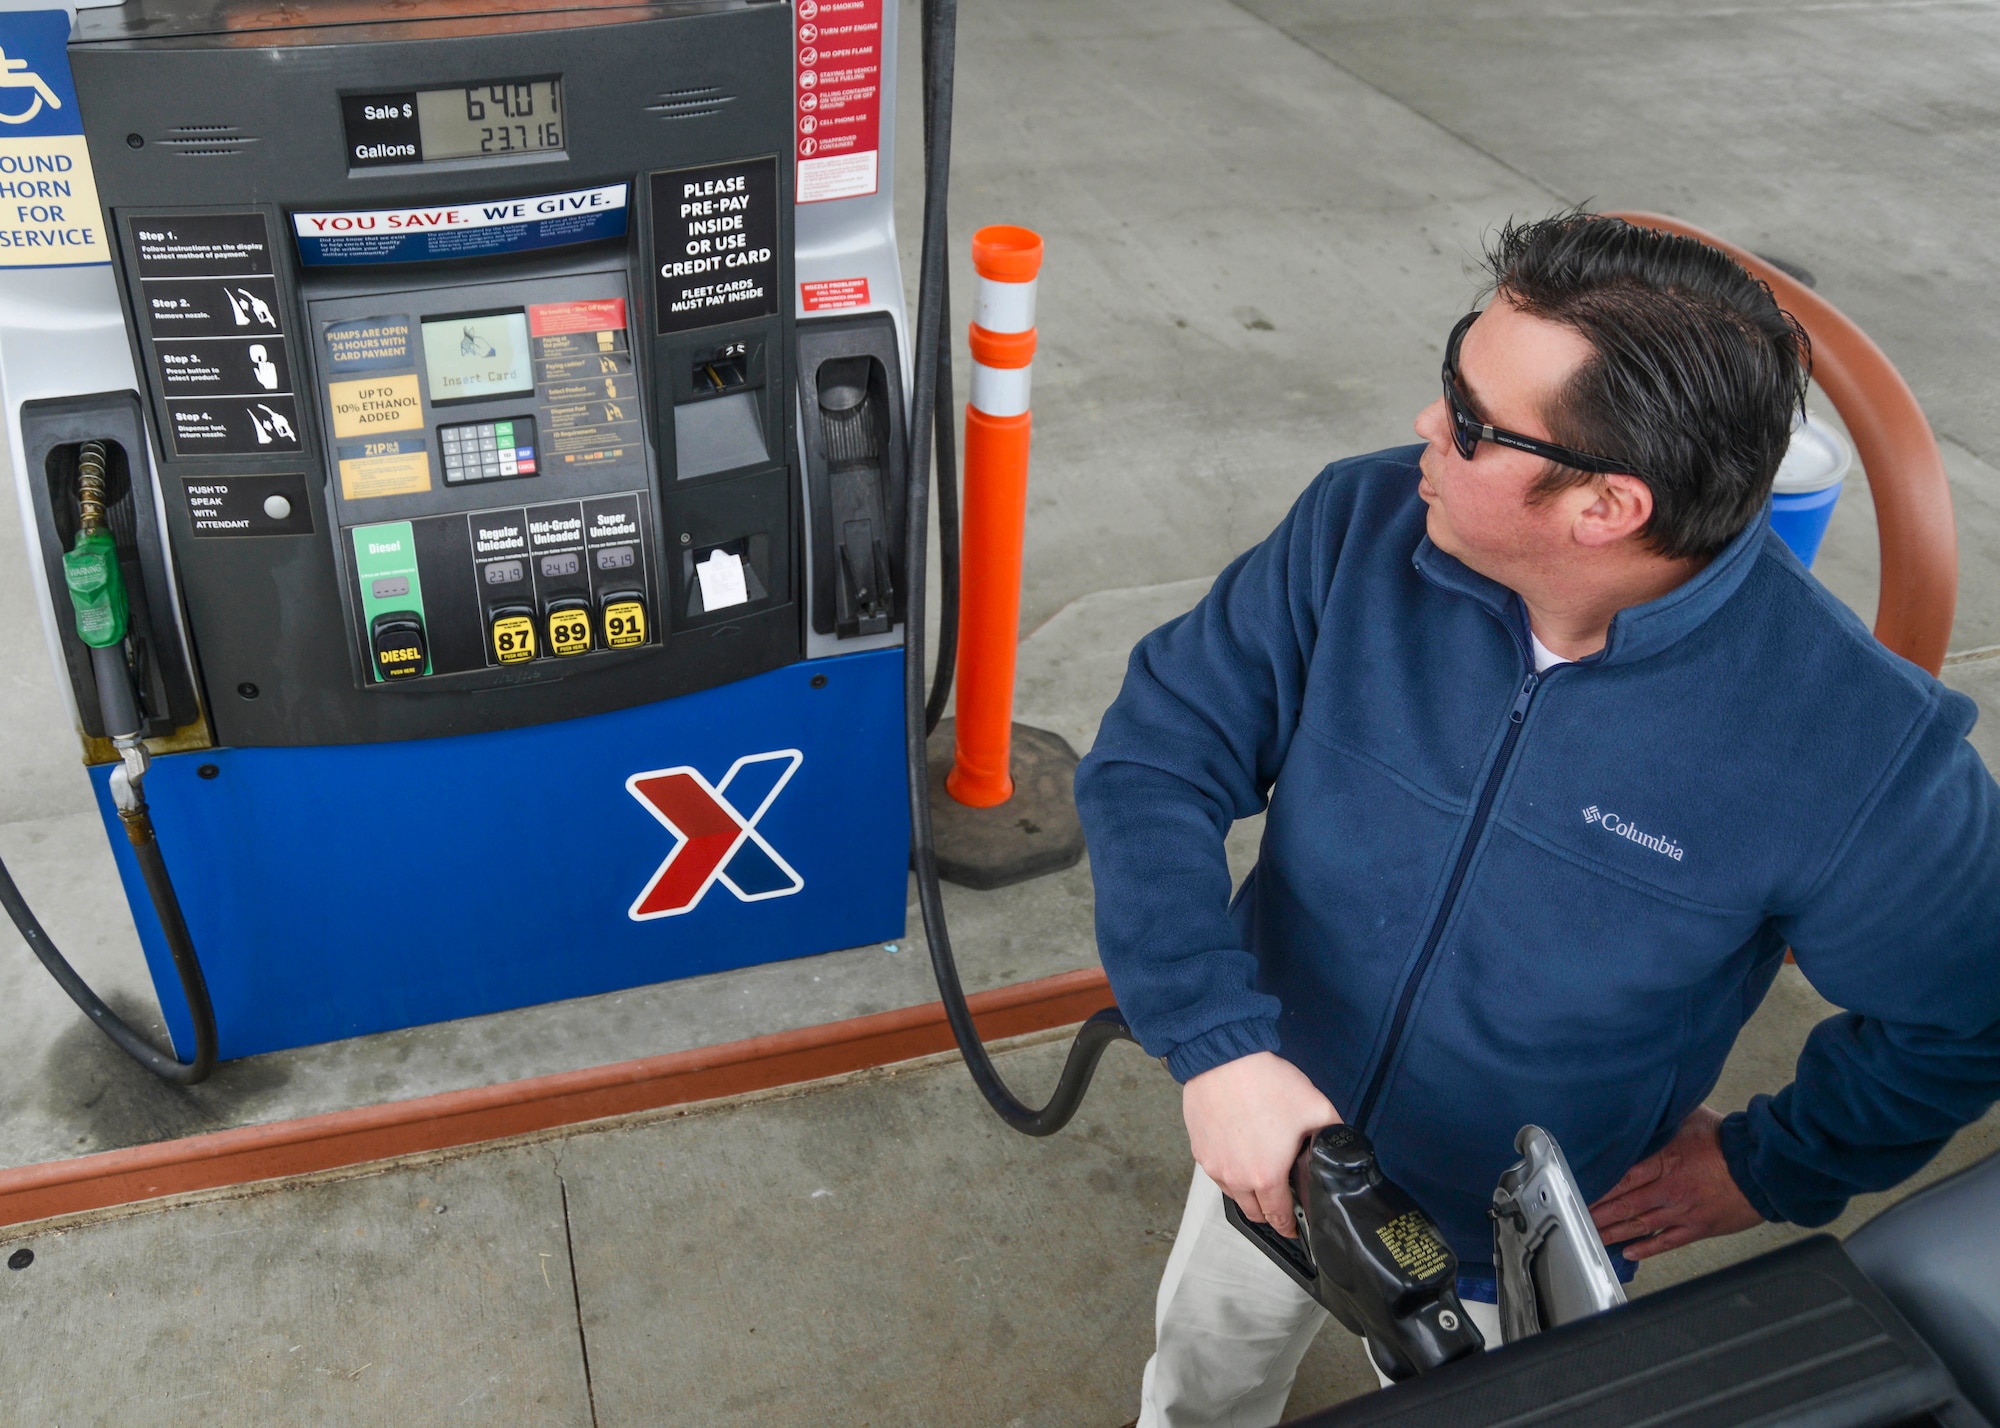 driving-on-base-could-make-you-eligible-for-gas-tax-refund-edwards